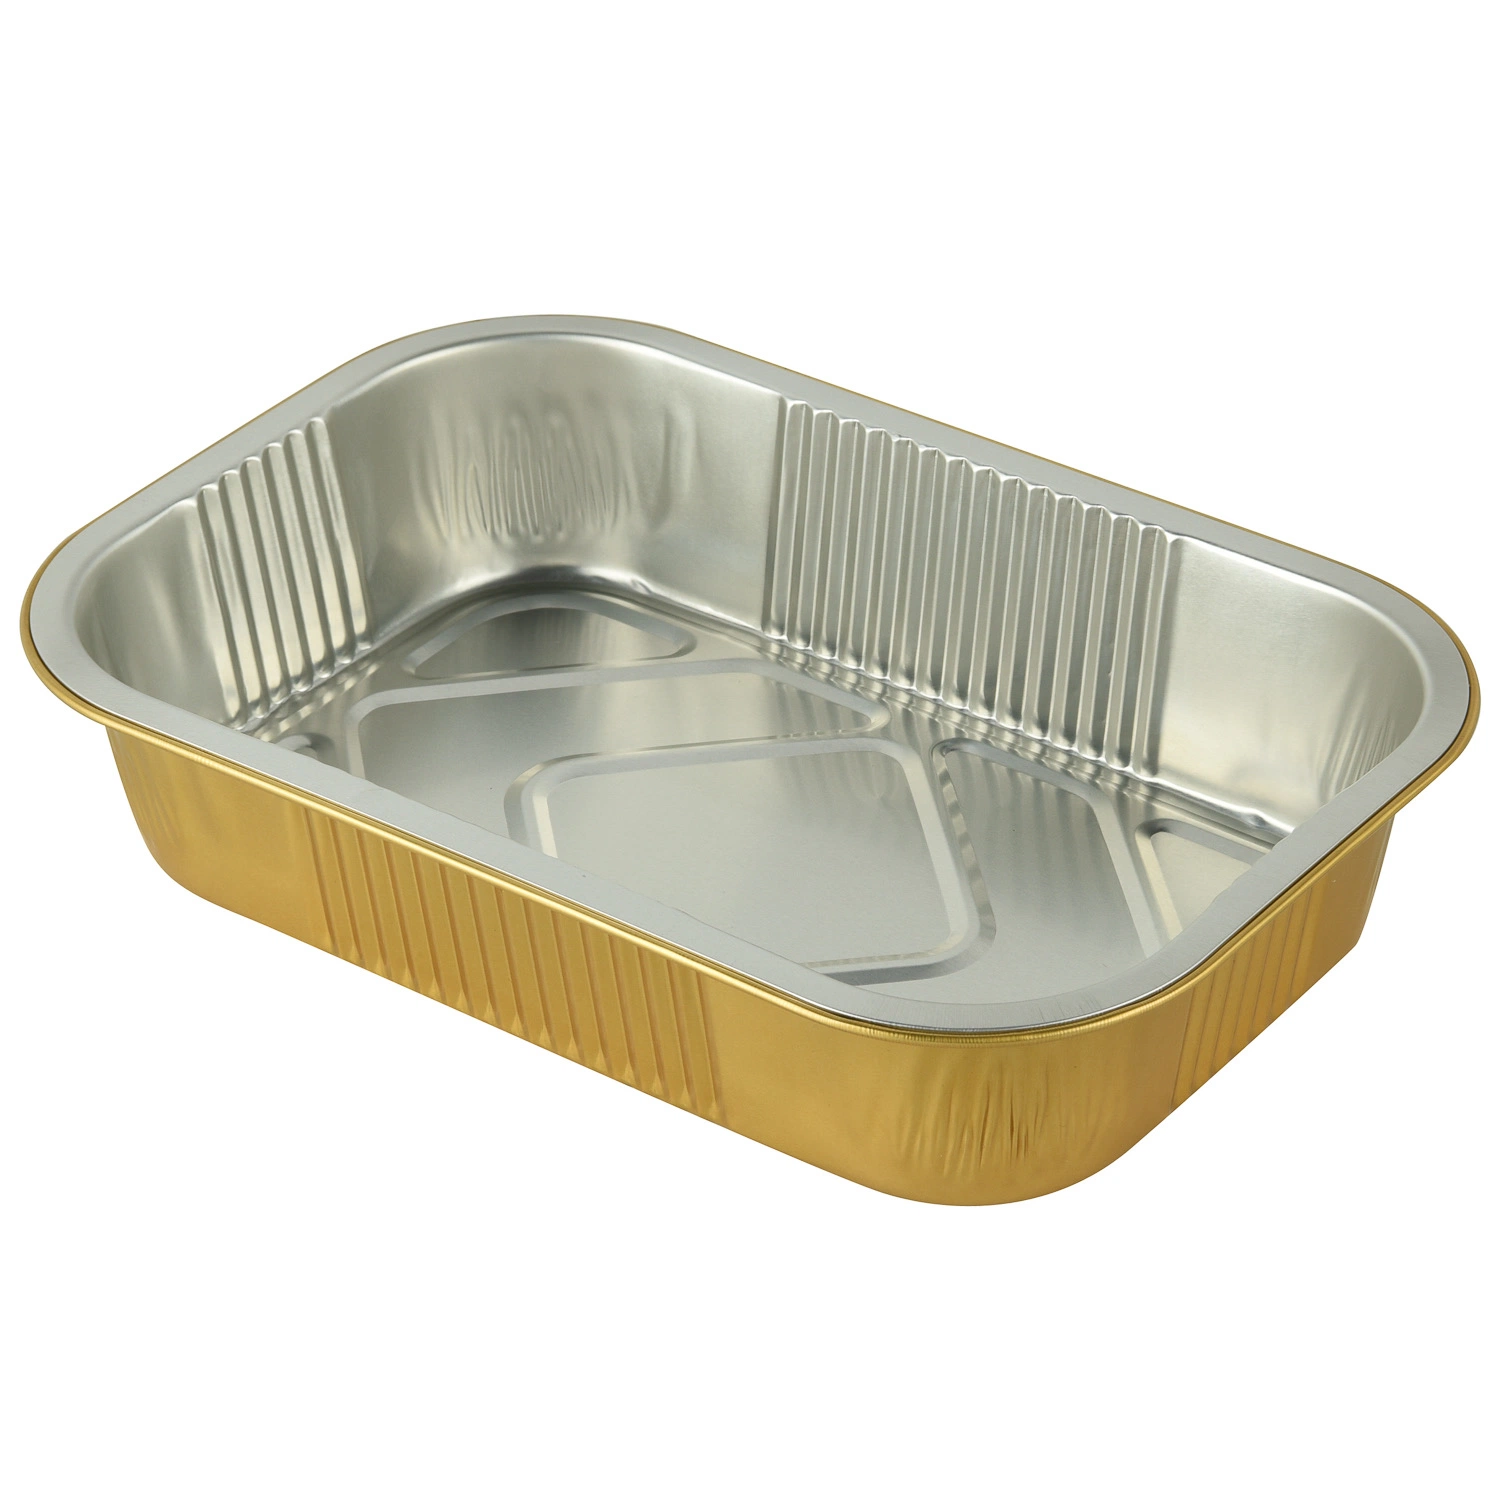 Disposable Aluminum Foil Kitchenware Cookware Baking Cake Pie Pan, Plate, Food Packaging Fast Food Container with Lids